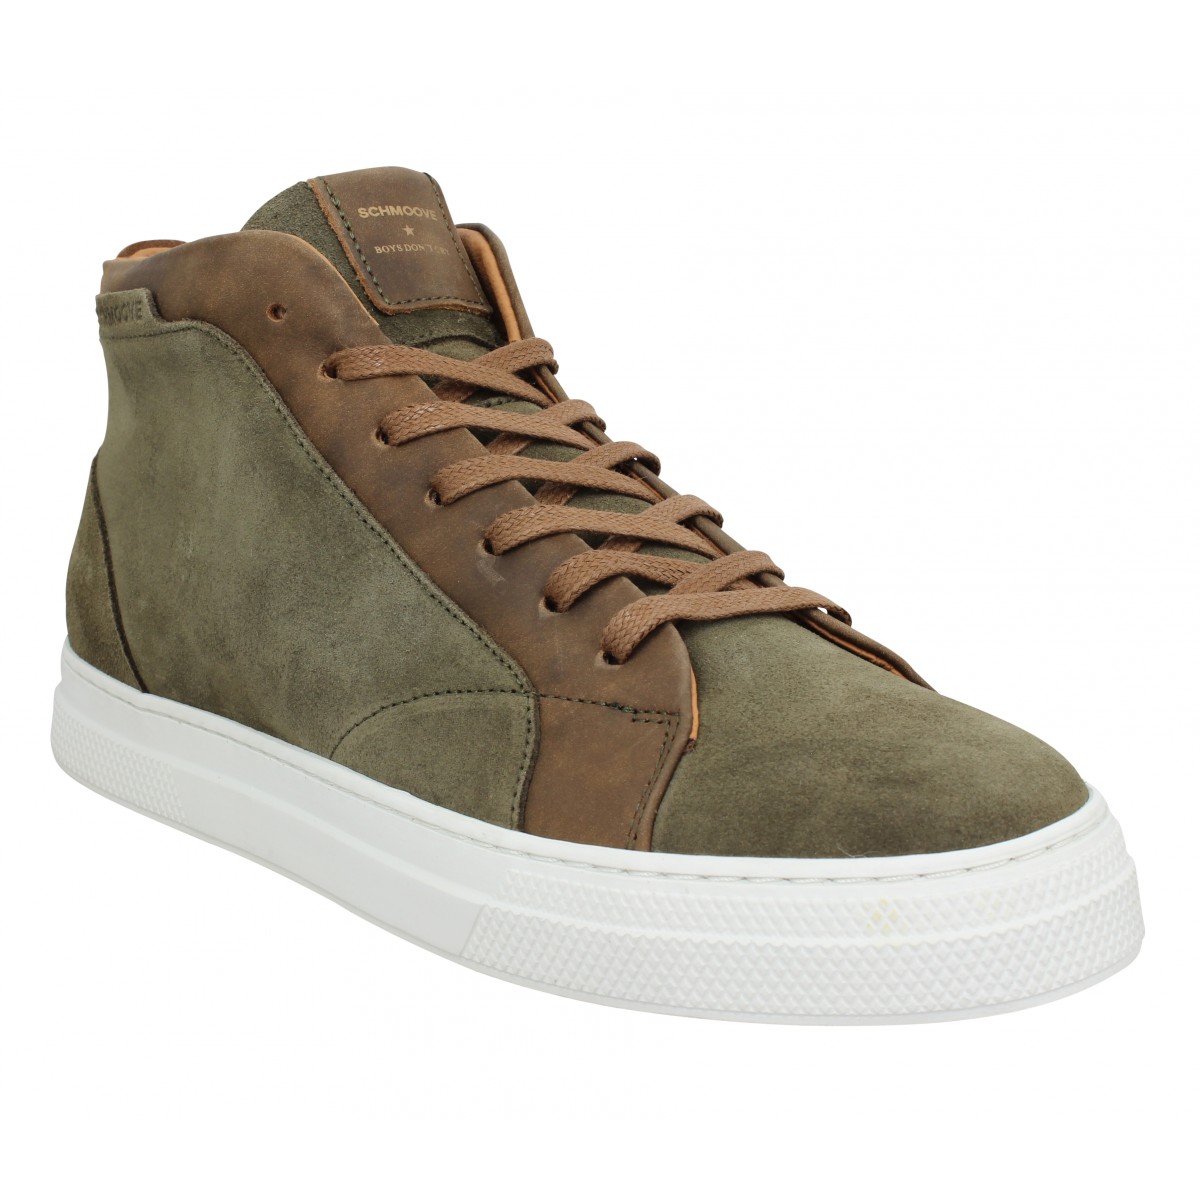 Baskets SCHMOOVE Spark Mid Zip suede Homme Army Tabac